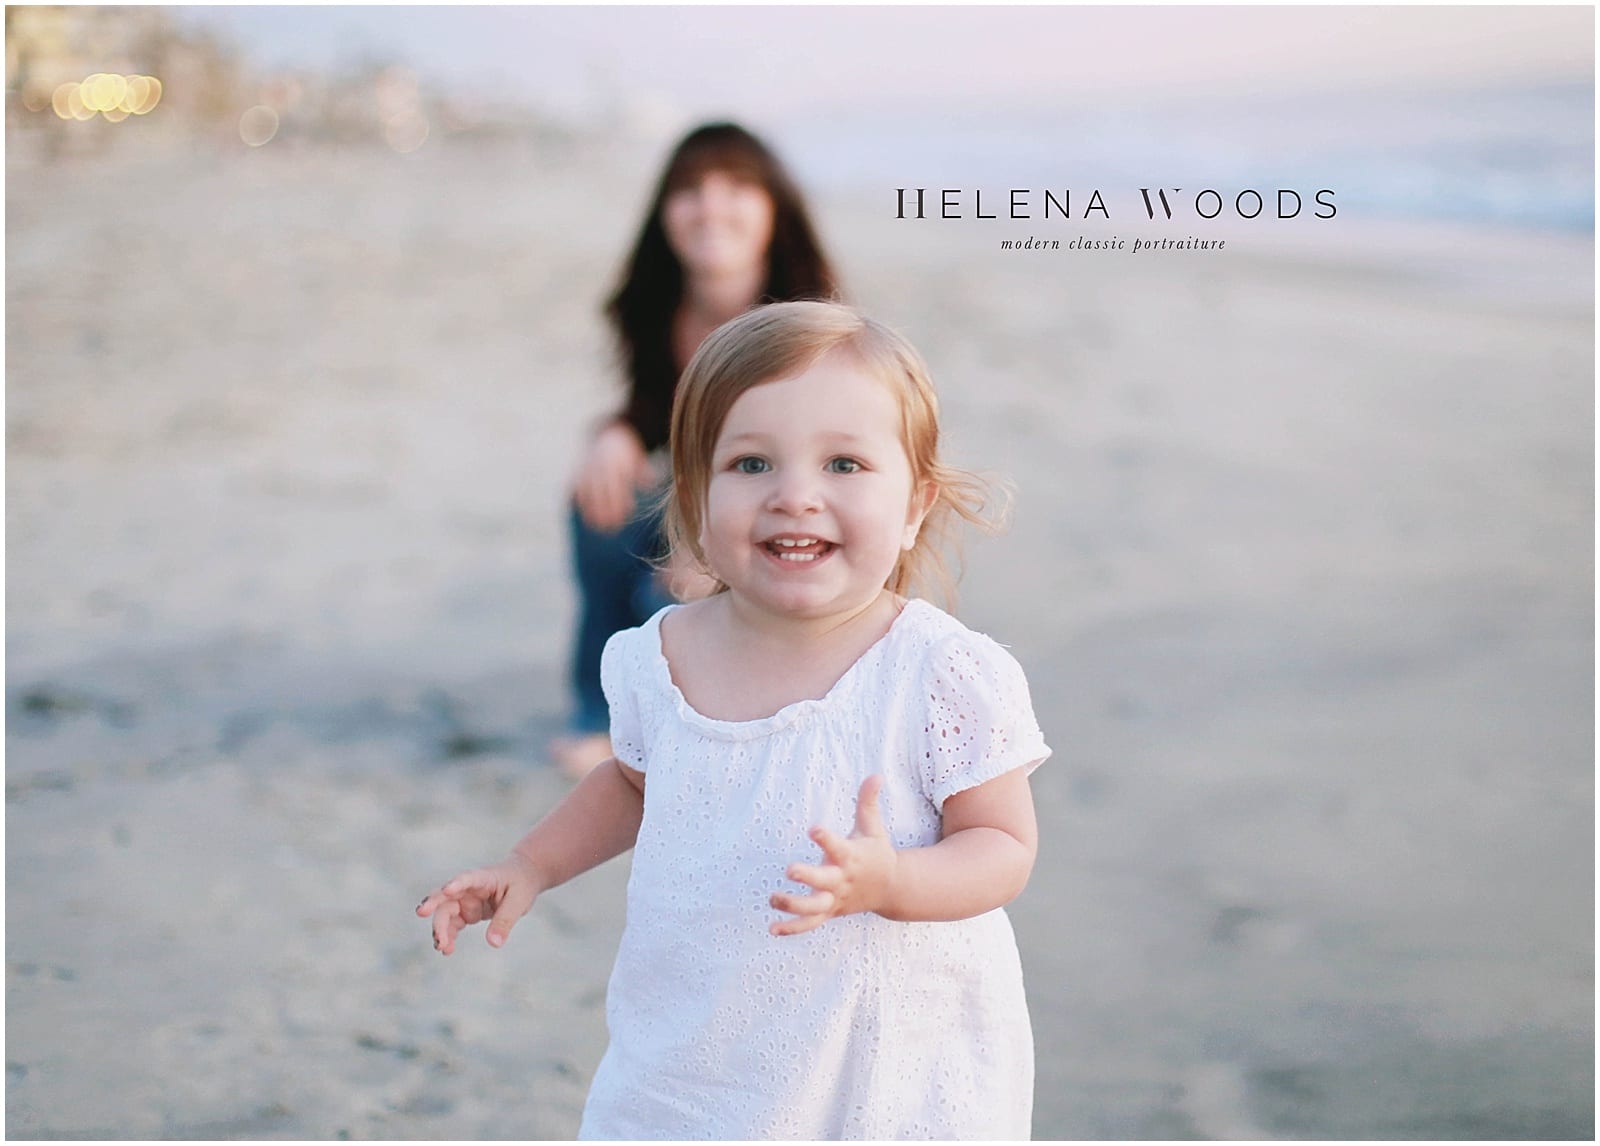 Helena Woods Connecticut Greenwich New york City Manhattan Beach Photographer. Children's and Family beach photography, why photographing kids at the beach is the best. Fairfield County Connecticut Children's and Baby Photographer, serving families in NYC and the south of France